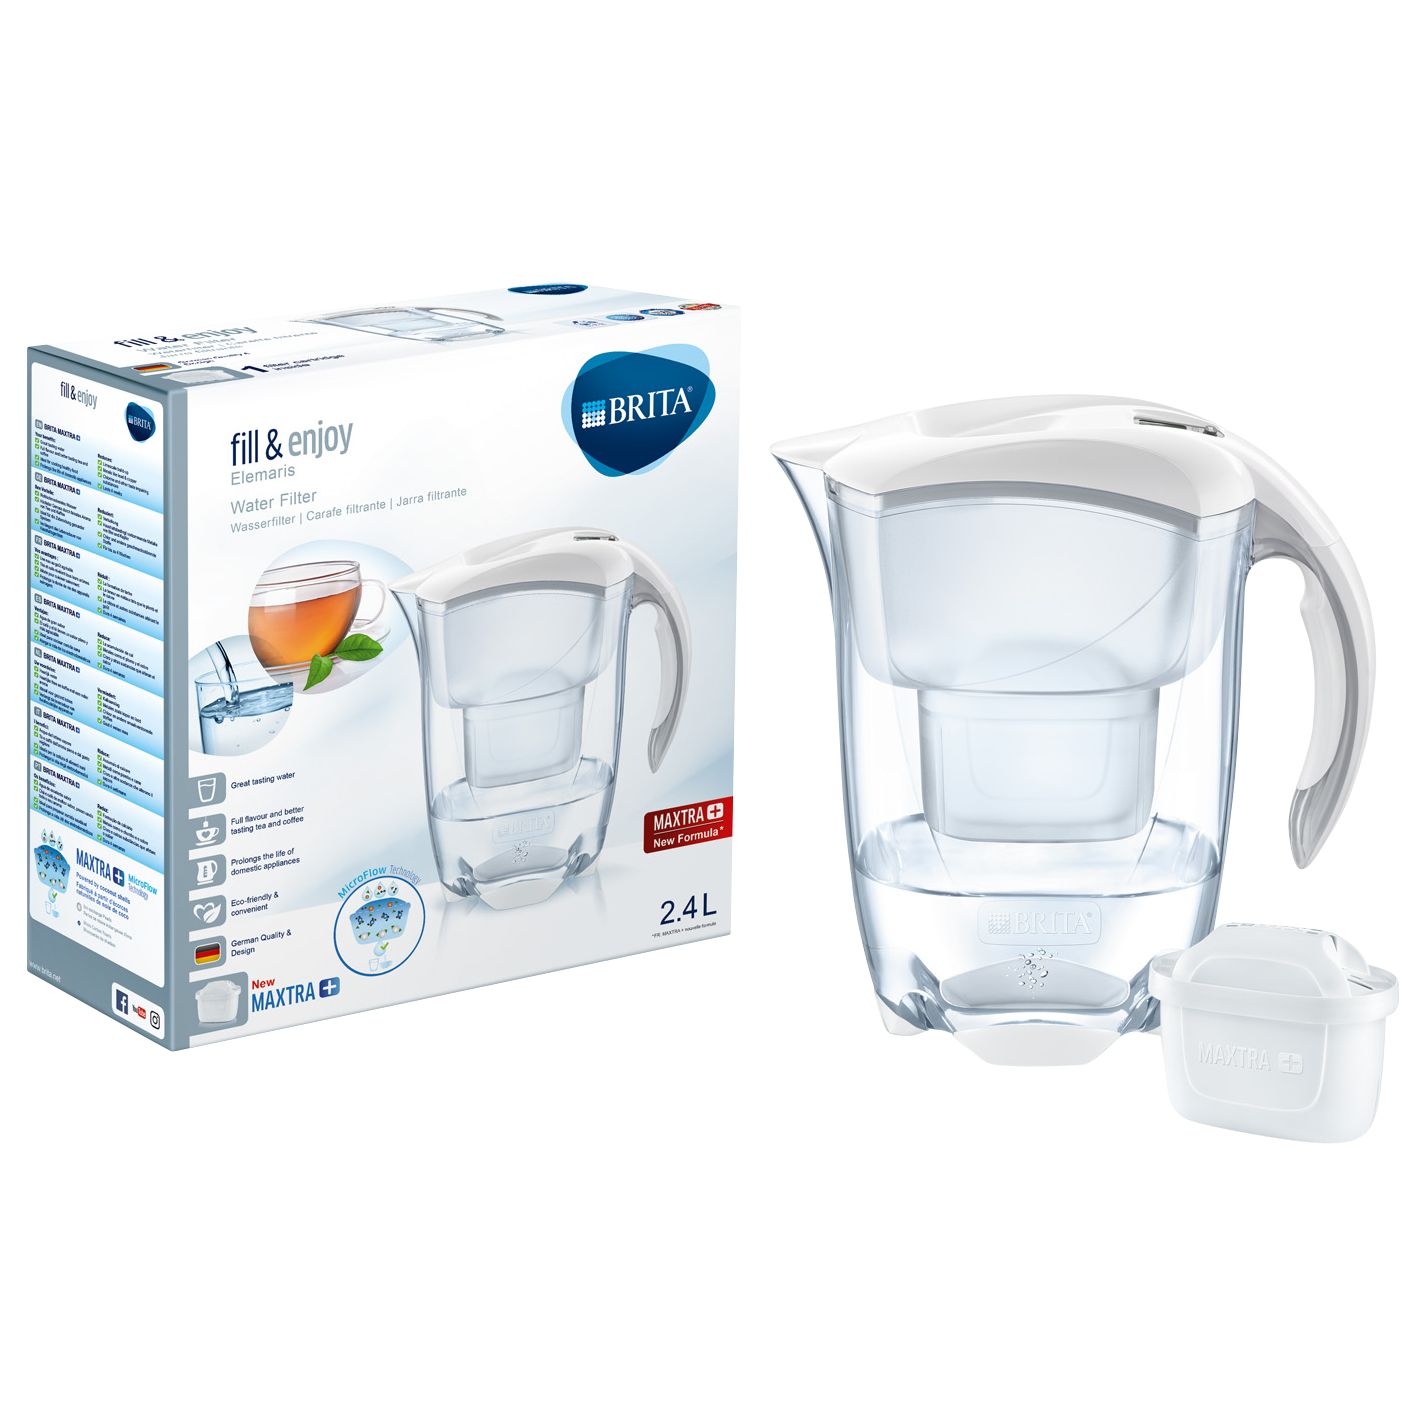 Maxtra+ Elemaris Water Filter Cool White, 2.4L